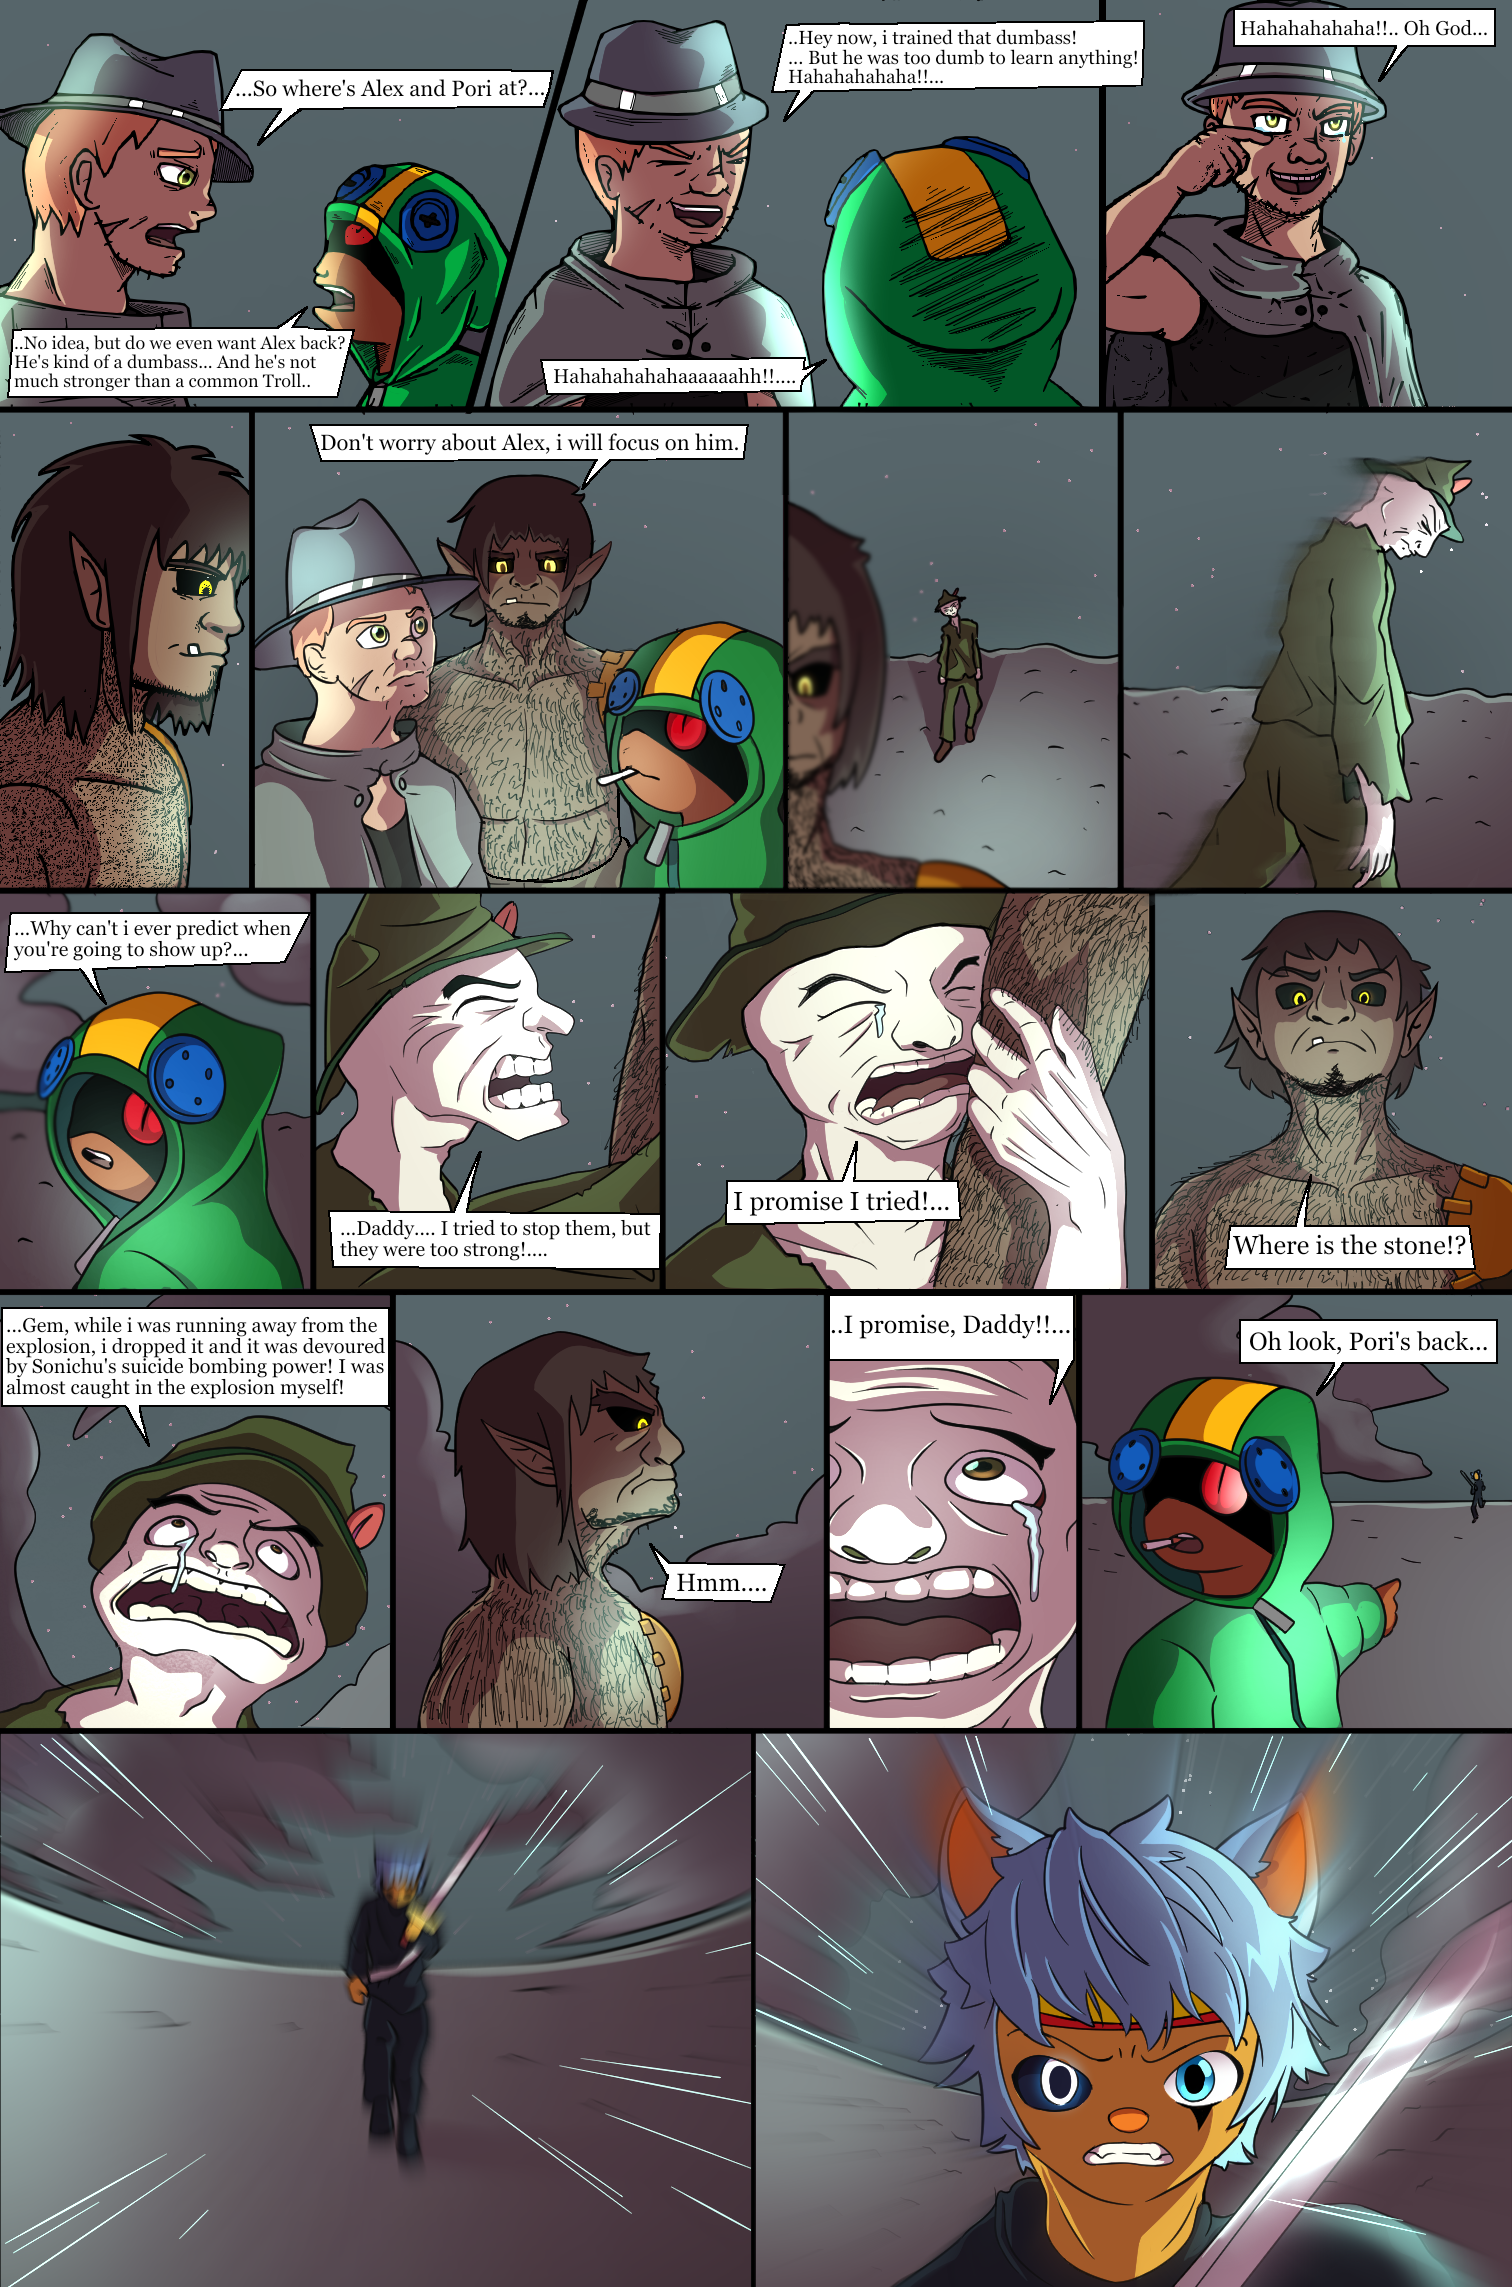 ch25/pg30.png. If you're seeing this, enable images. Or, perhaps we have a website issue. Try refreshing, if unsuccessful email commodorian@tailsgetstrolled.org with a detailed description of how you got here.